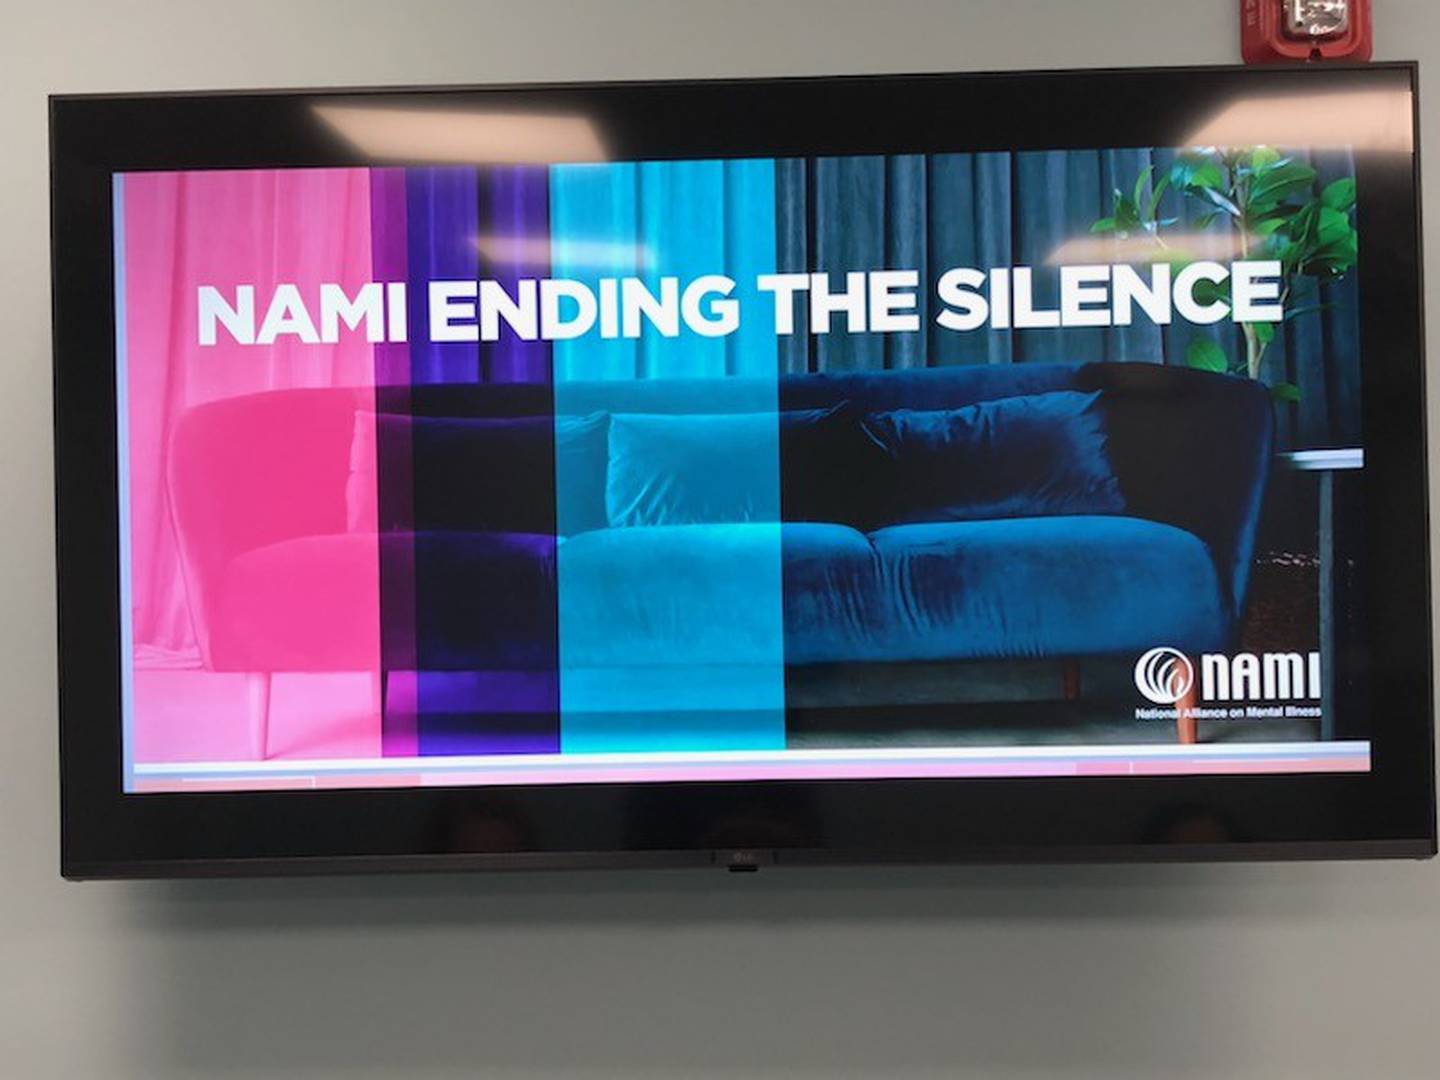 The Will-Grundy chapter of the National Alliance of Mental Illness is now offering NAMI’s “Ending the Silence” program to local schools.